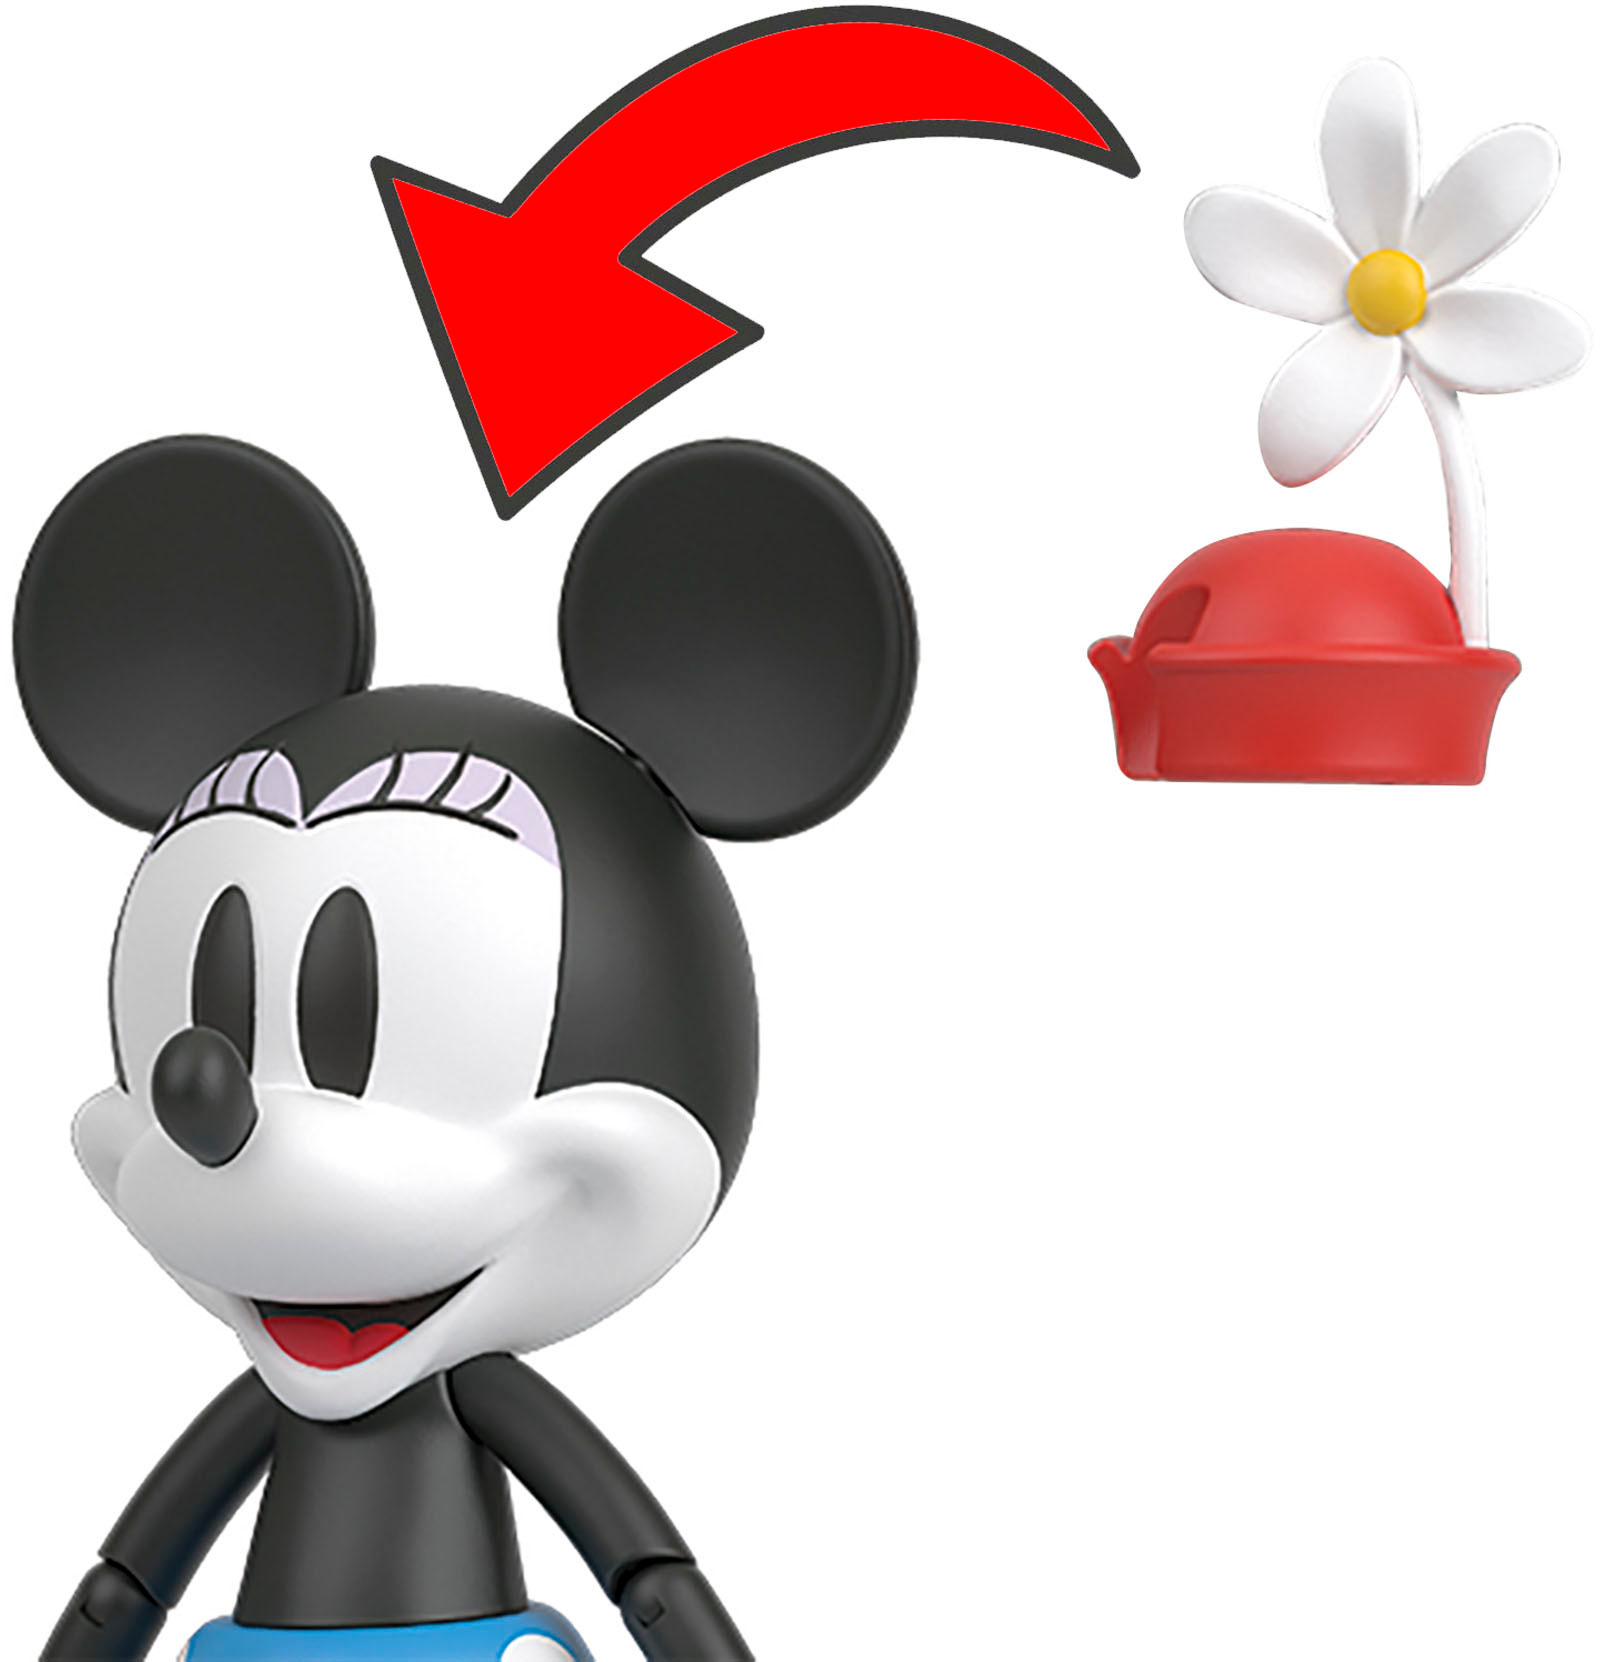 Disney - Mickey and Minnie Mouse 2 Pack - figurine 001 Pocket Pop